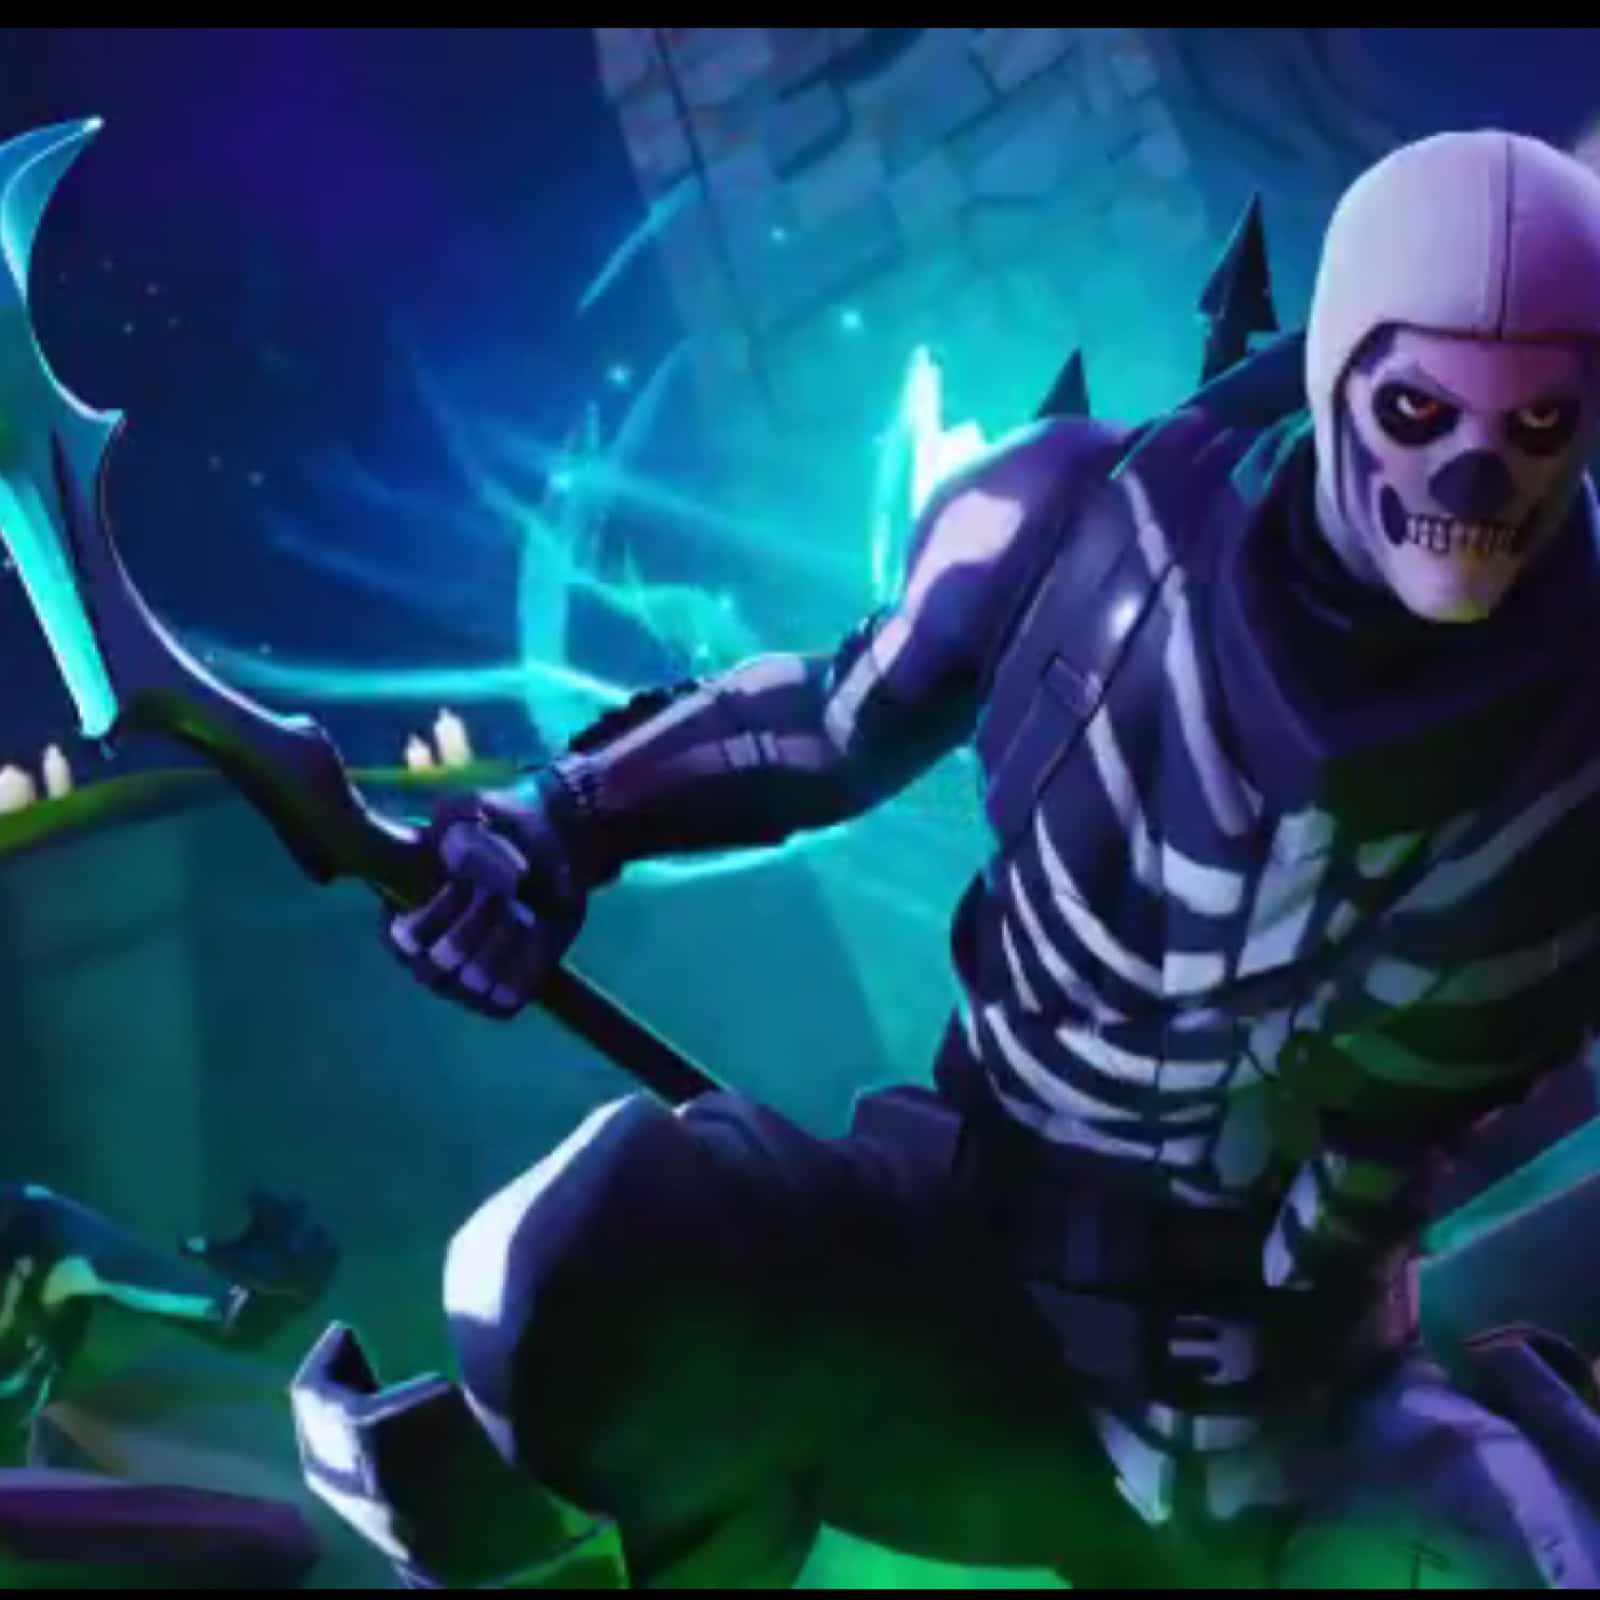 Experience Fortnite in a new light with the Purple Skull Trooper Wallpaper